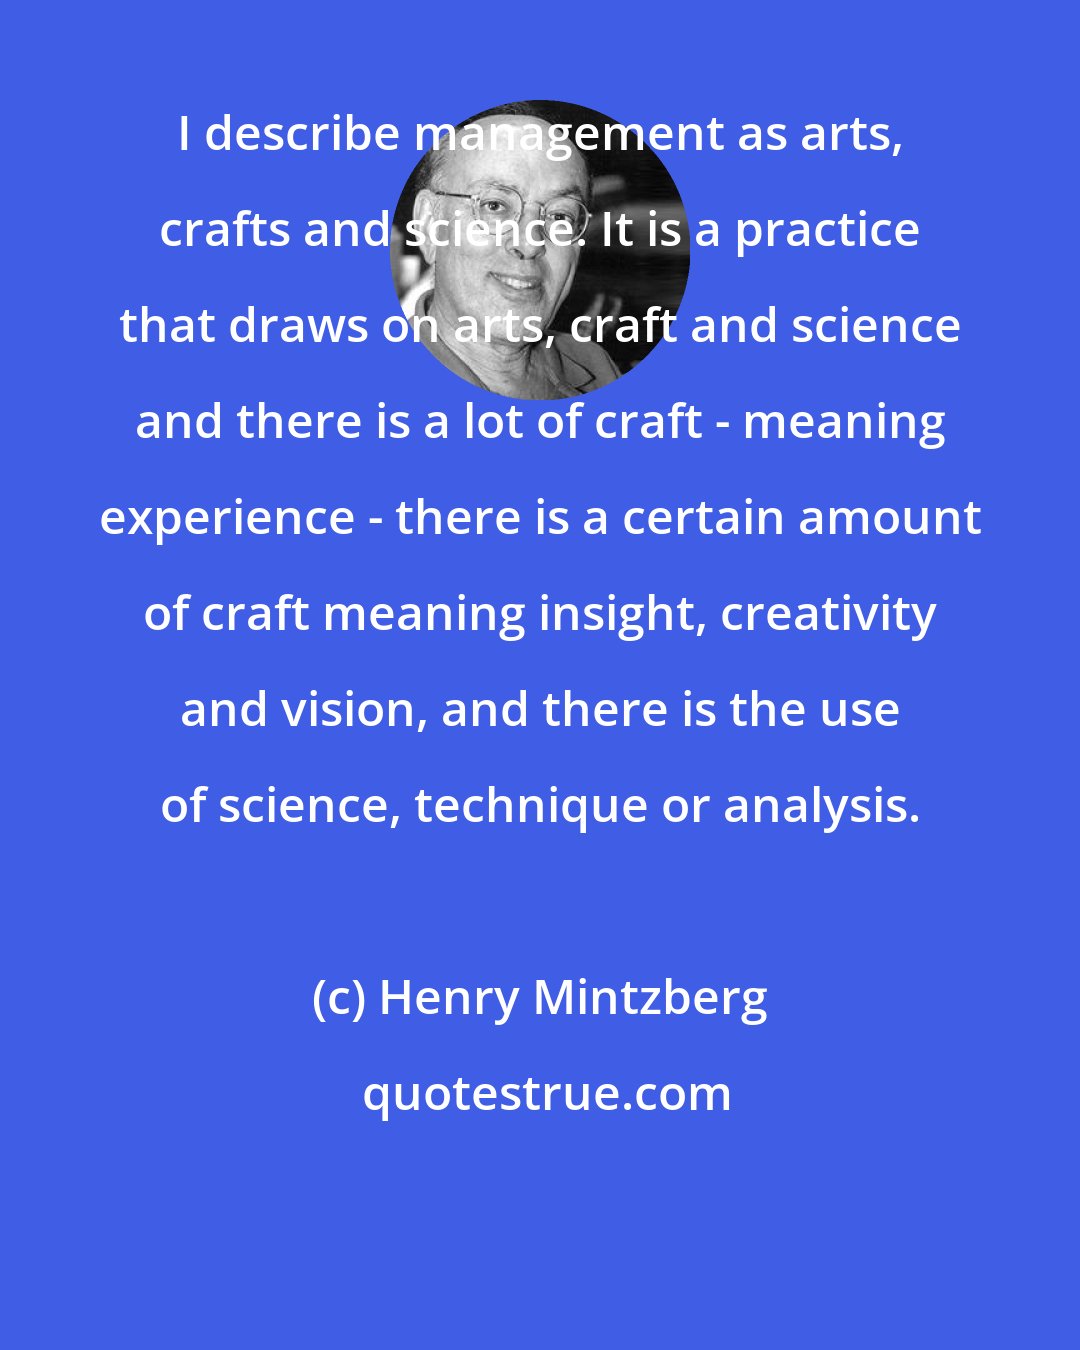 Henry Mintzberg: I describe management as arts, crafts and science. It is a practice that draws on arts, craft and science and there is a lot of craft - meaning experience - there is a certain amount of craft meaning insight, creativity and vision, and there is the use of science, technique or analysis.